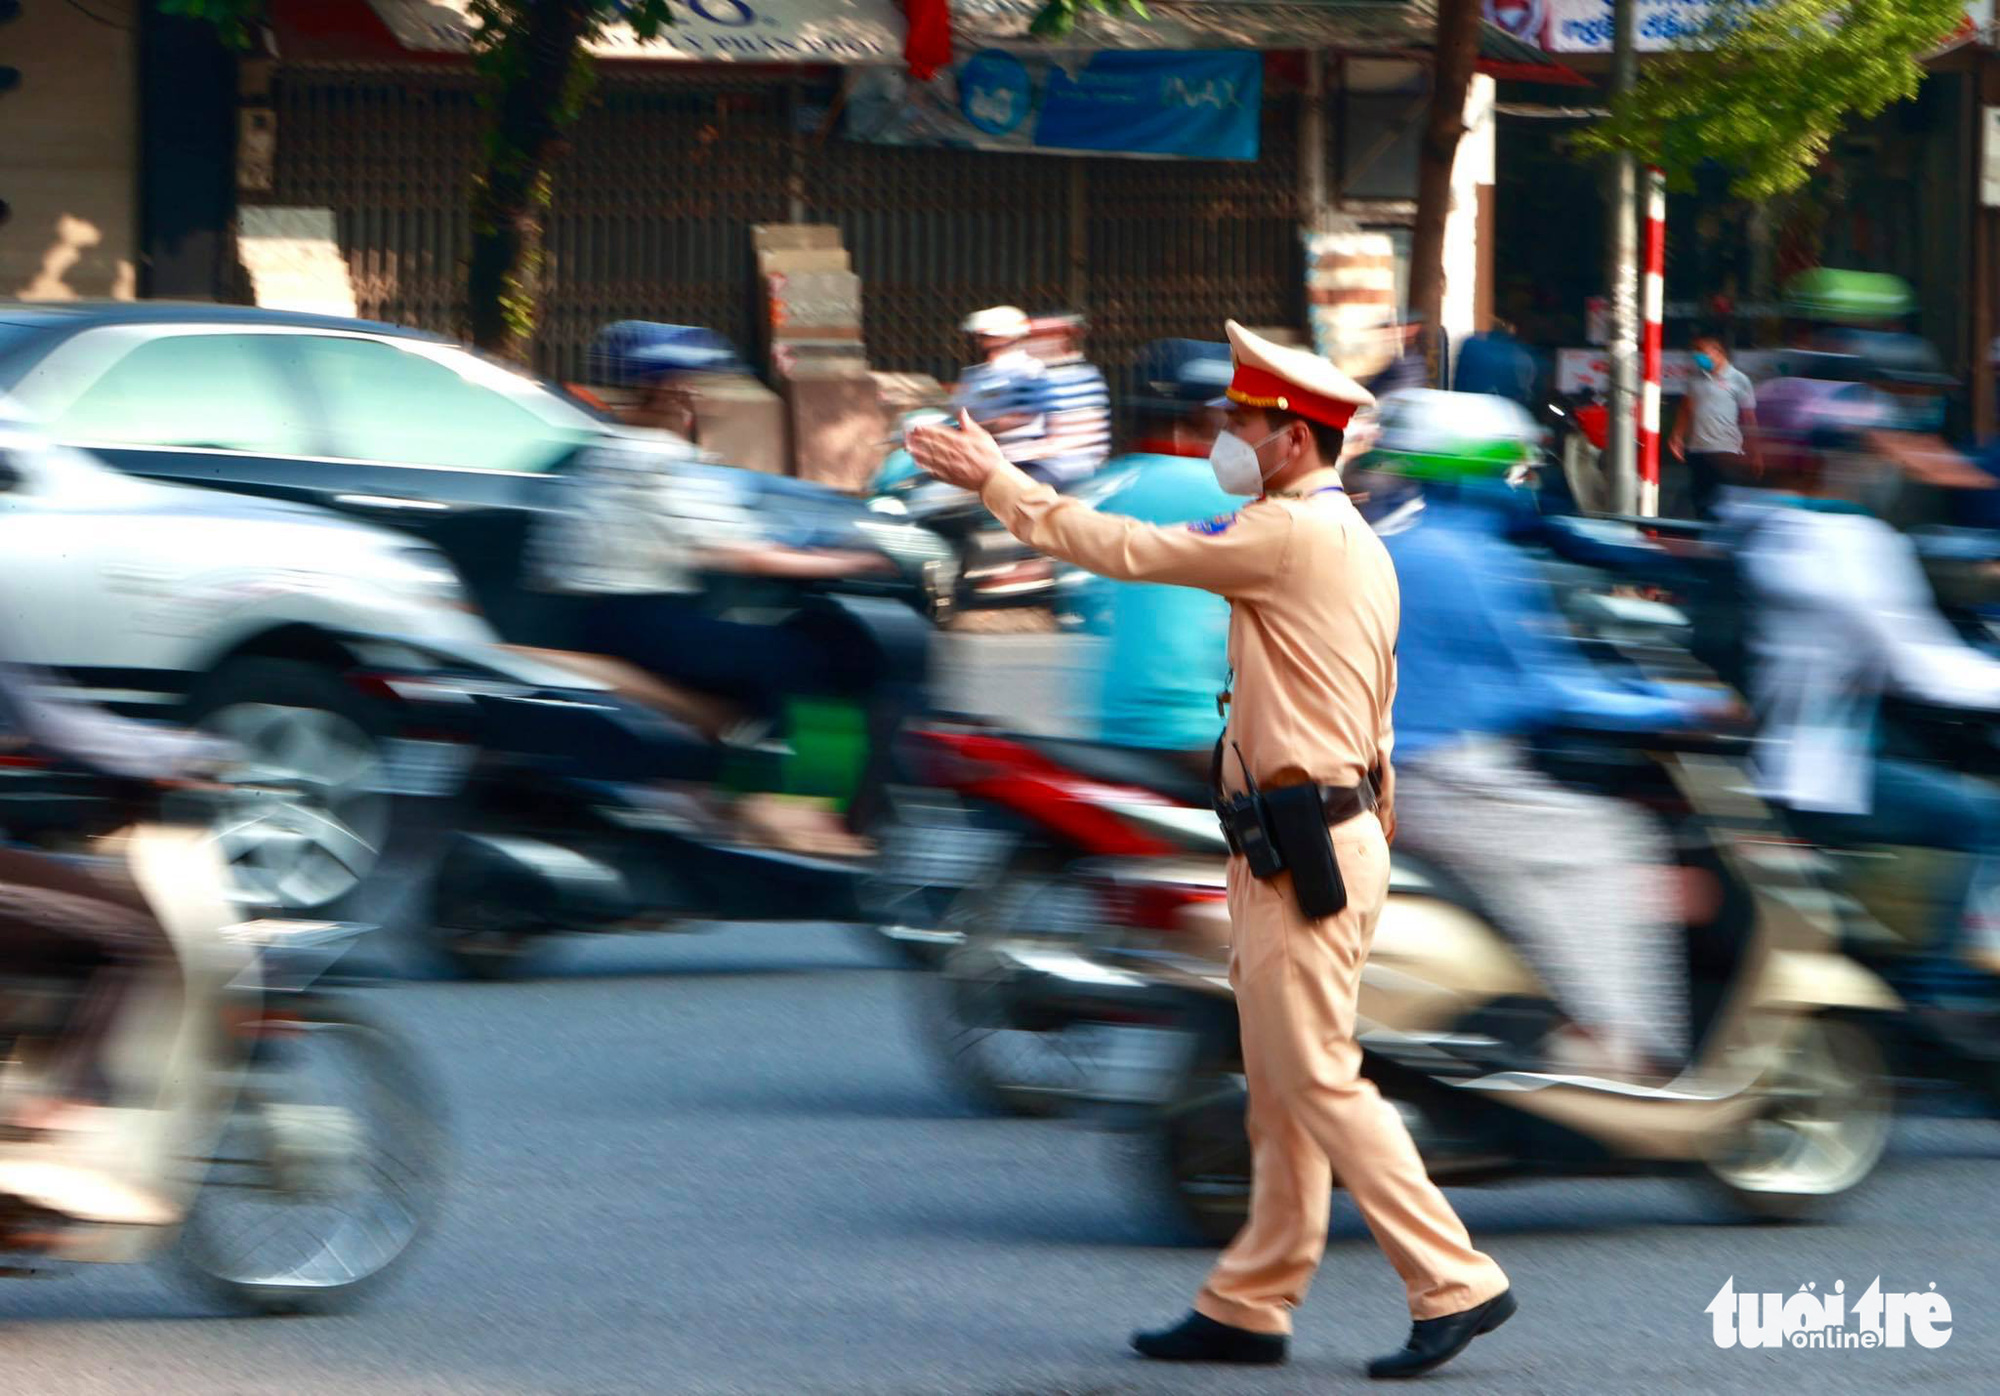 A police officer regulates traffic at the fork of Tran Duy Hung and Hoang Dao Thuy Streets in Cau Giay District, Hanoi, September 21, 2021. Photo: Tuoi Tre